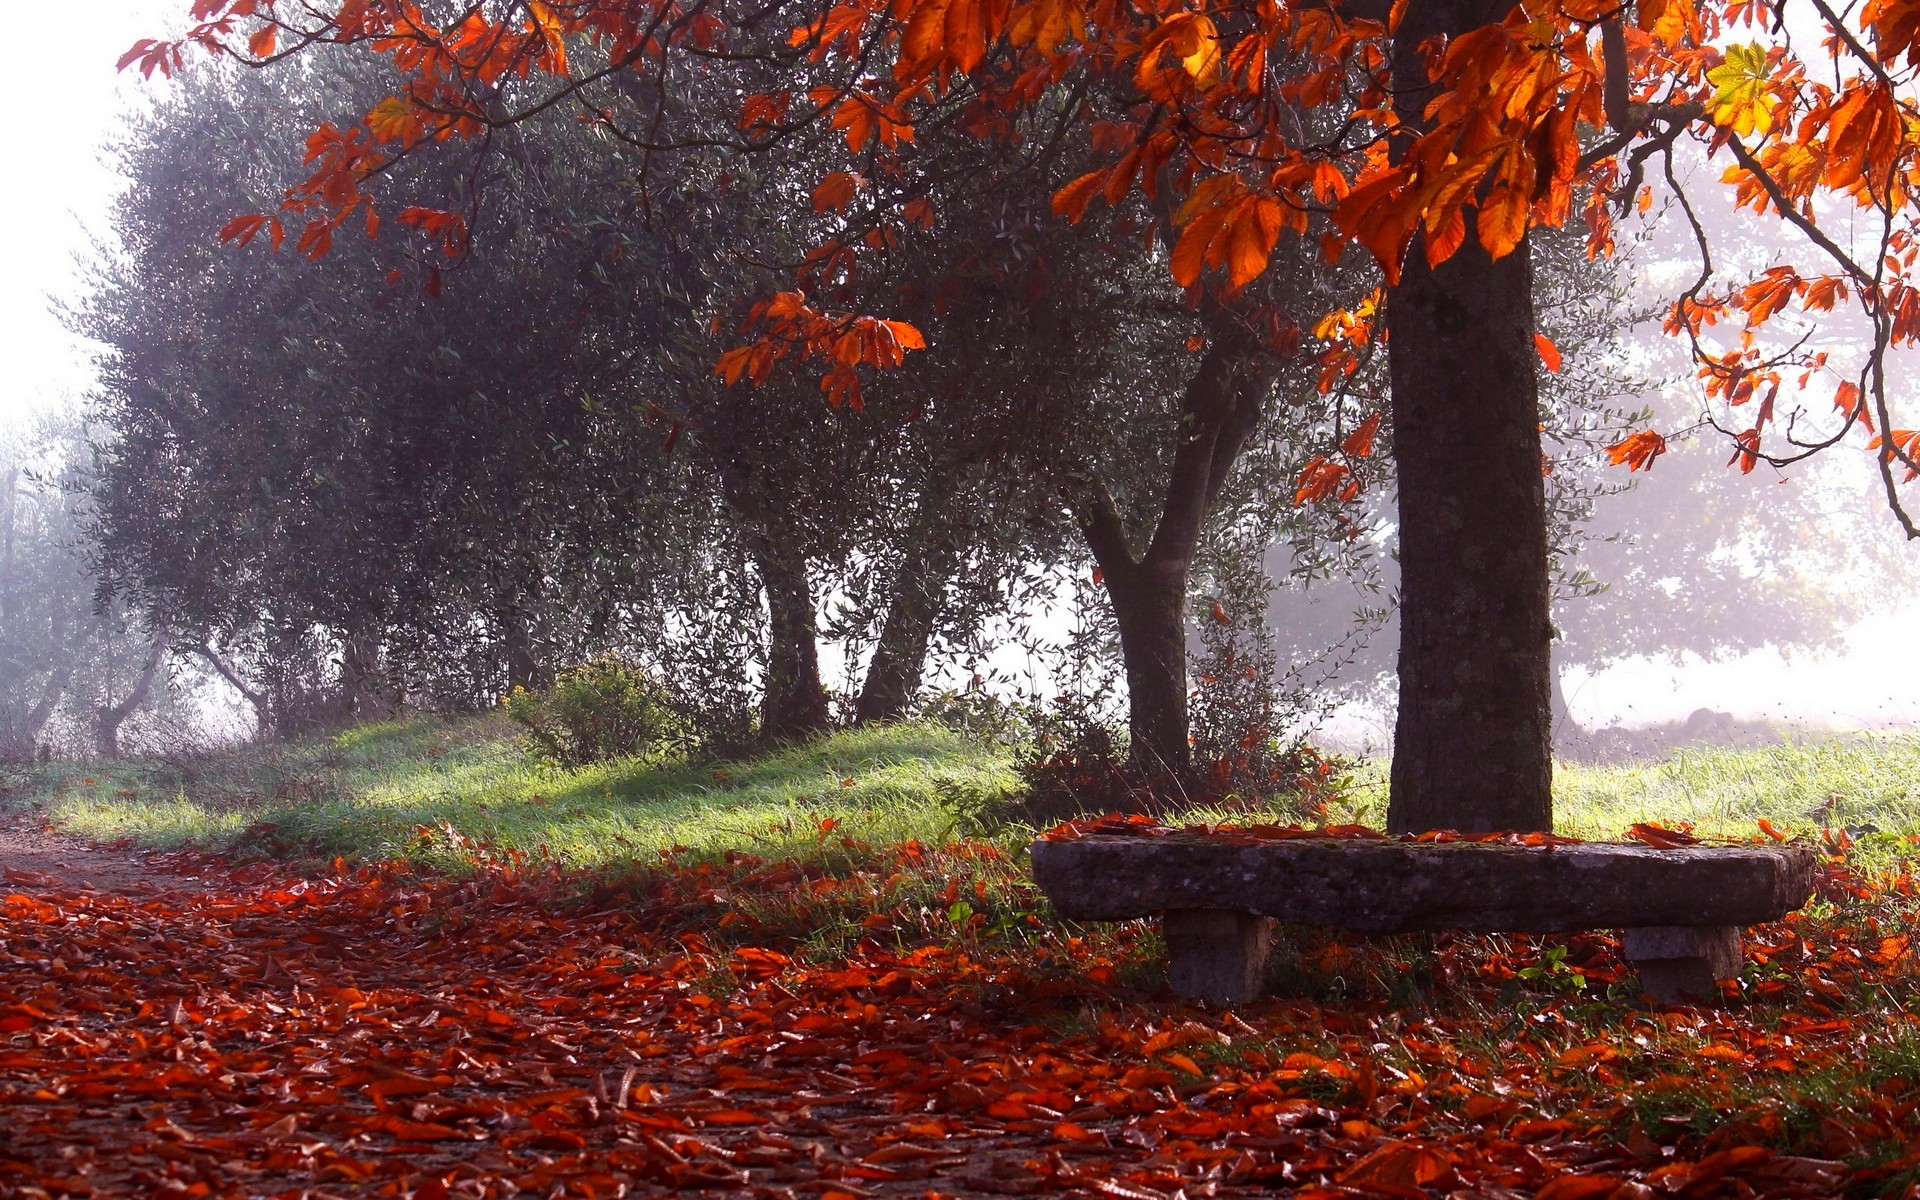 General 1920x1200 nature photography landscape park fall trees leaves bench morning mist sunlight